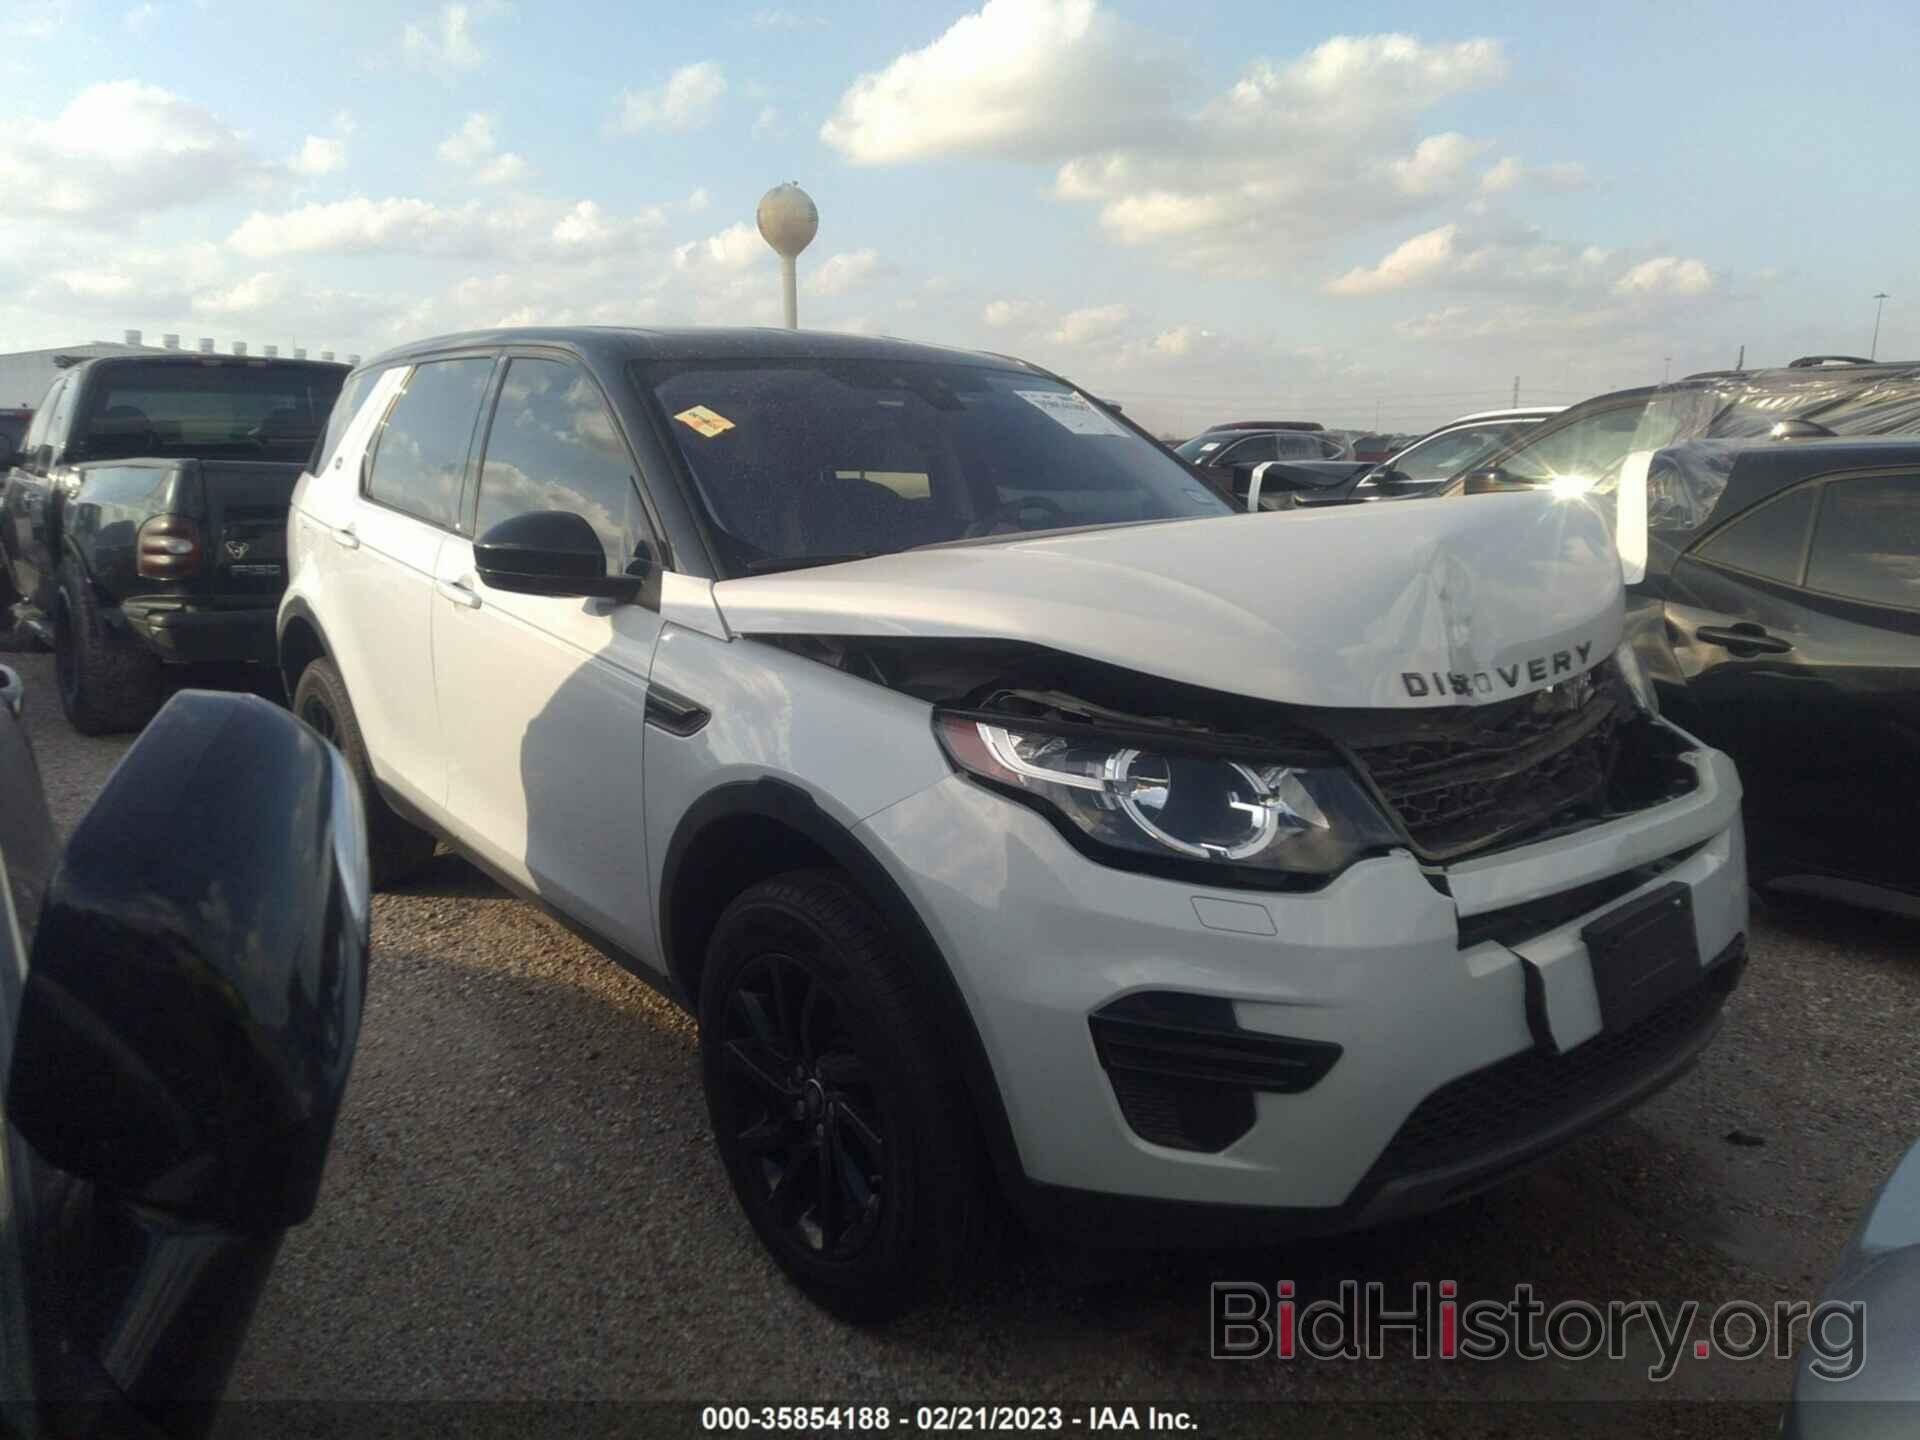 Фотография SALCP2FX8KH818047 - LAND ROVER DISCOVERY SPORT 2019